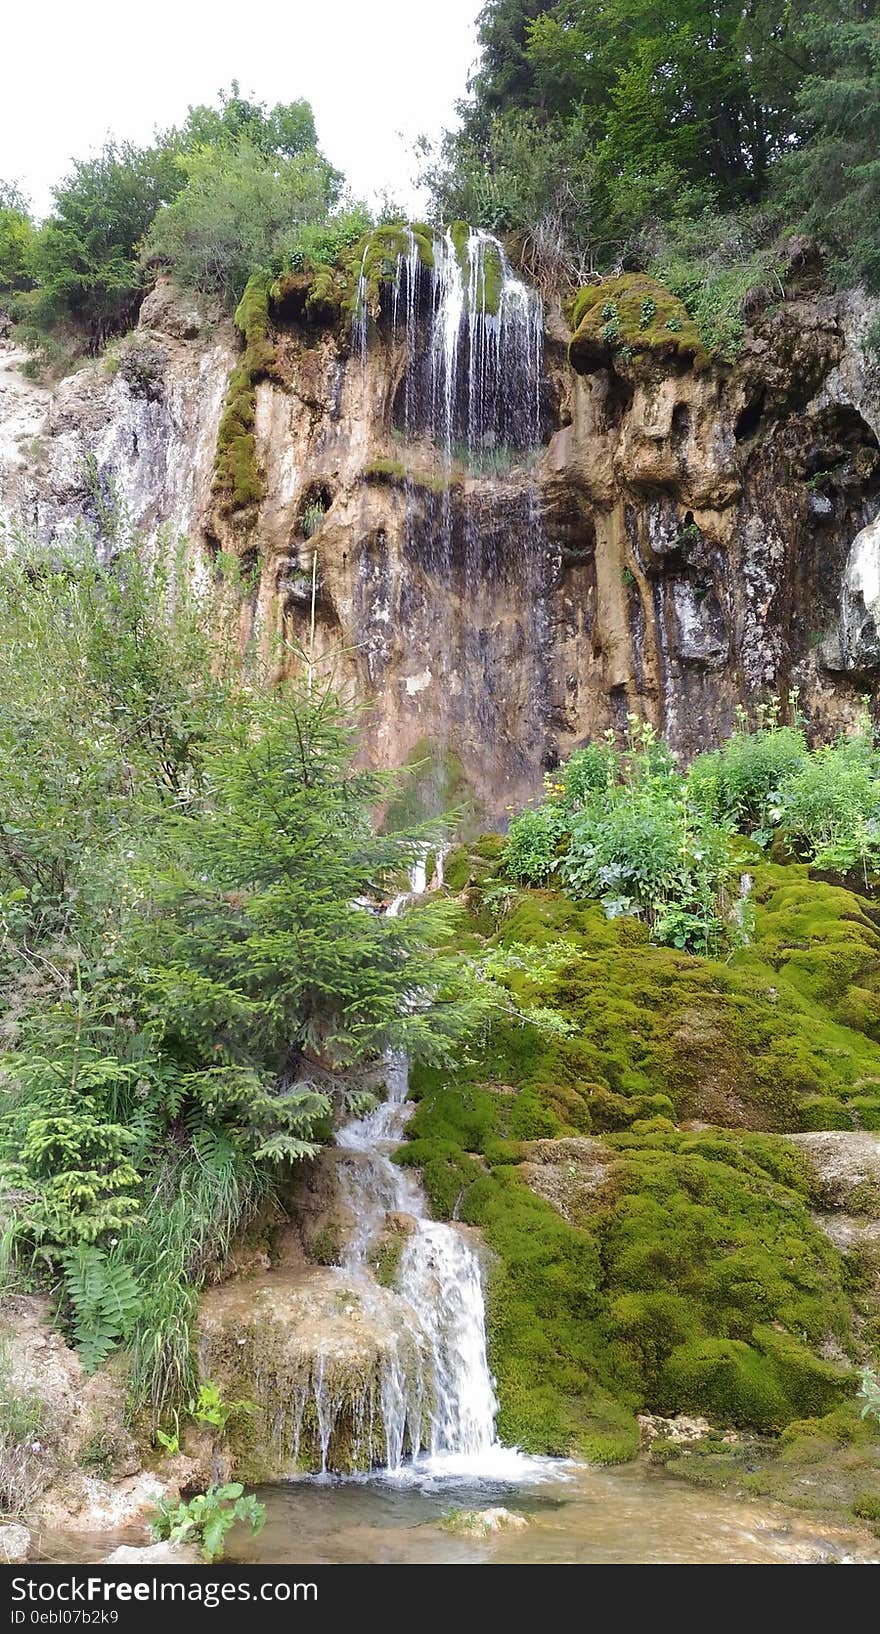 A part of a waterfall located in Romania, Alba county, named Pisoaia. There is a lot of vegetation around it, such as trees, located on the cliff and at the bottom left of the waterfall. Moss can be seen on the bottom right side of the image. It has a total length of about 18 meters. The chalk formations give it a spectacular look. A part of a waterfall located in Romania, Alba county, named Pisoaia. There is a lot of vegetation around it, such as trees, located on the cliff and at the bottom left of the waterfall. Moss can be seen on the bottom right side of the image. It has a total length of about 18 meters. The chalk formations give it a spectacular look.